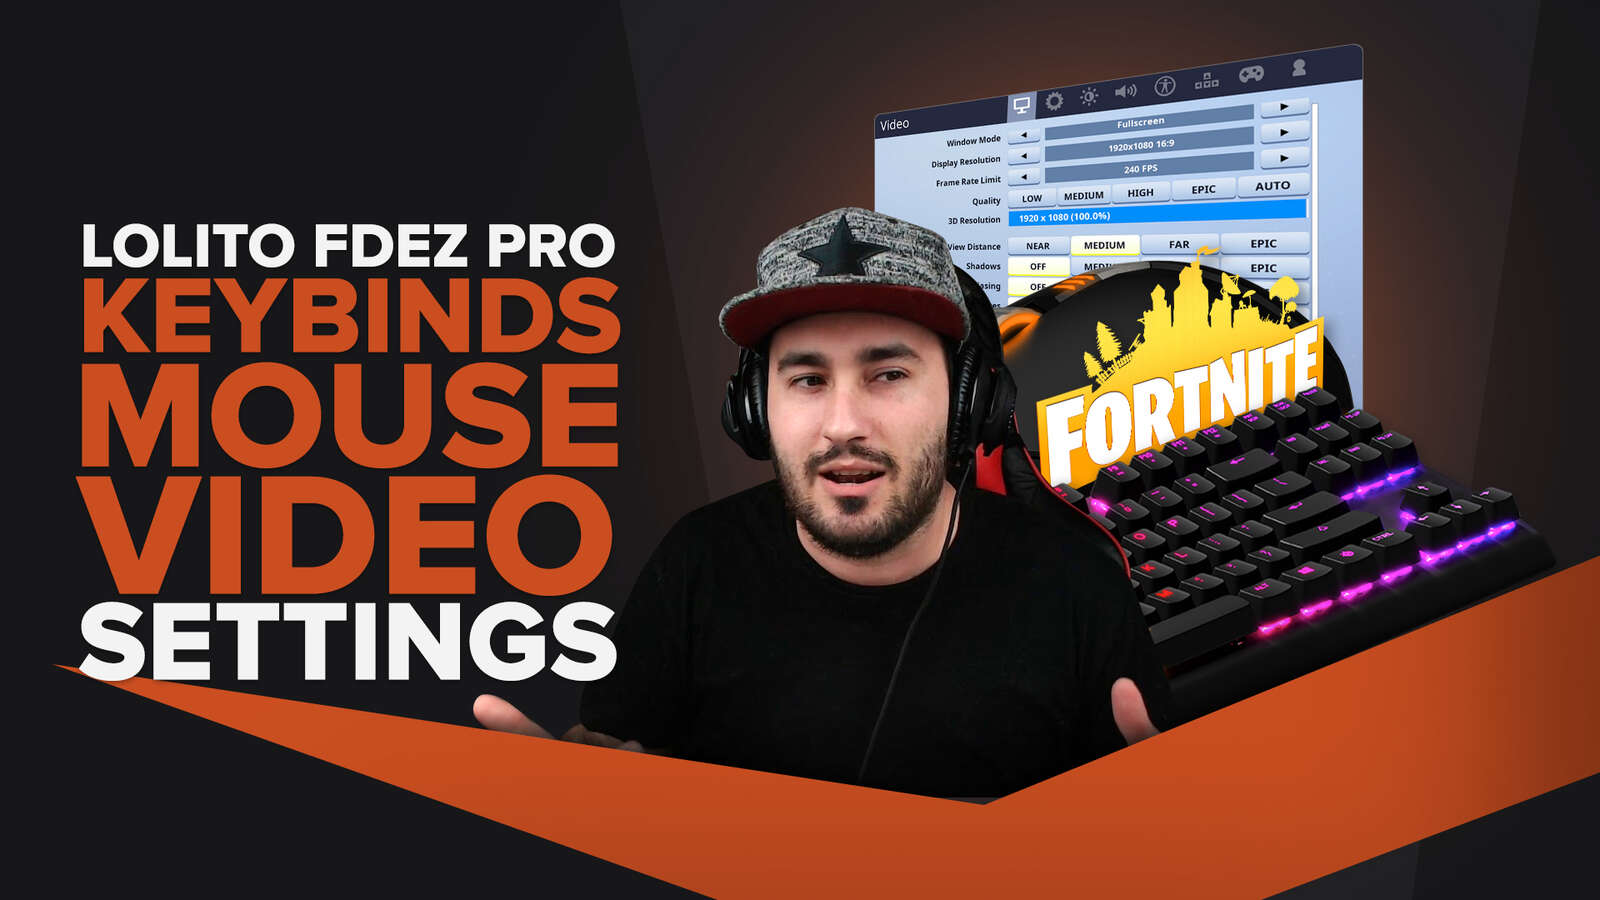 Lolito Fdez's | Keybinds, Mouse, Video Pro Fornite Settings